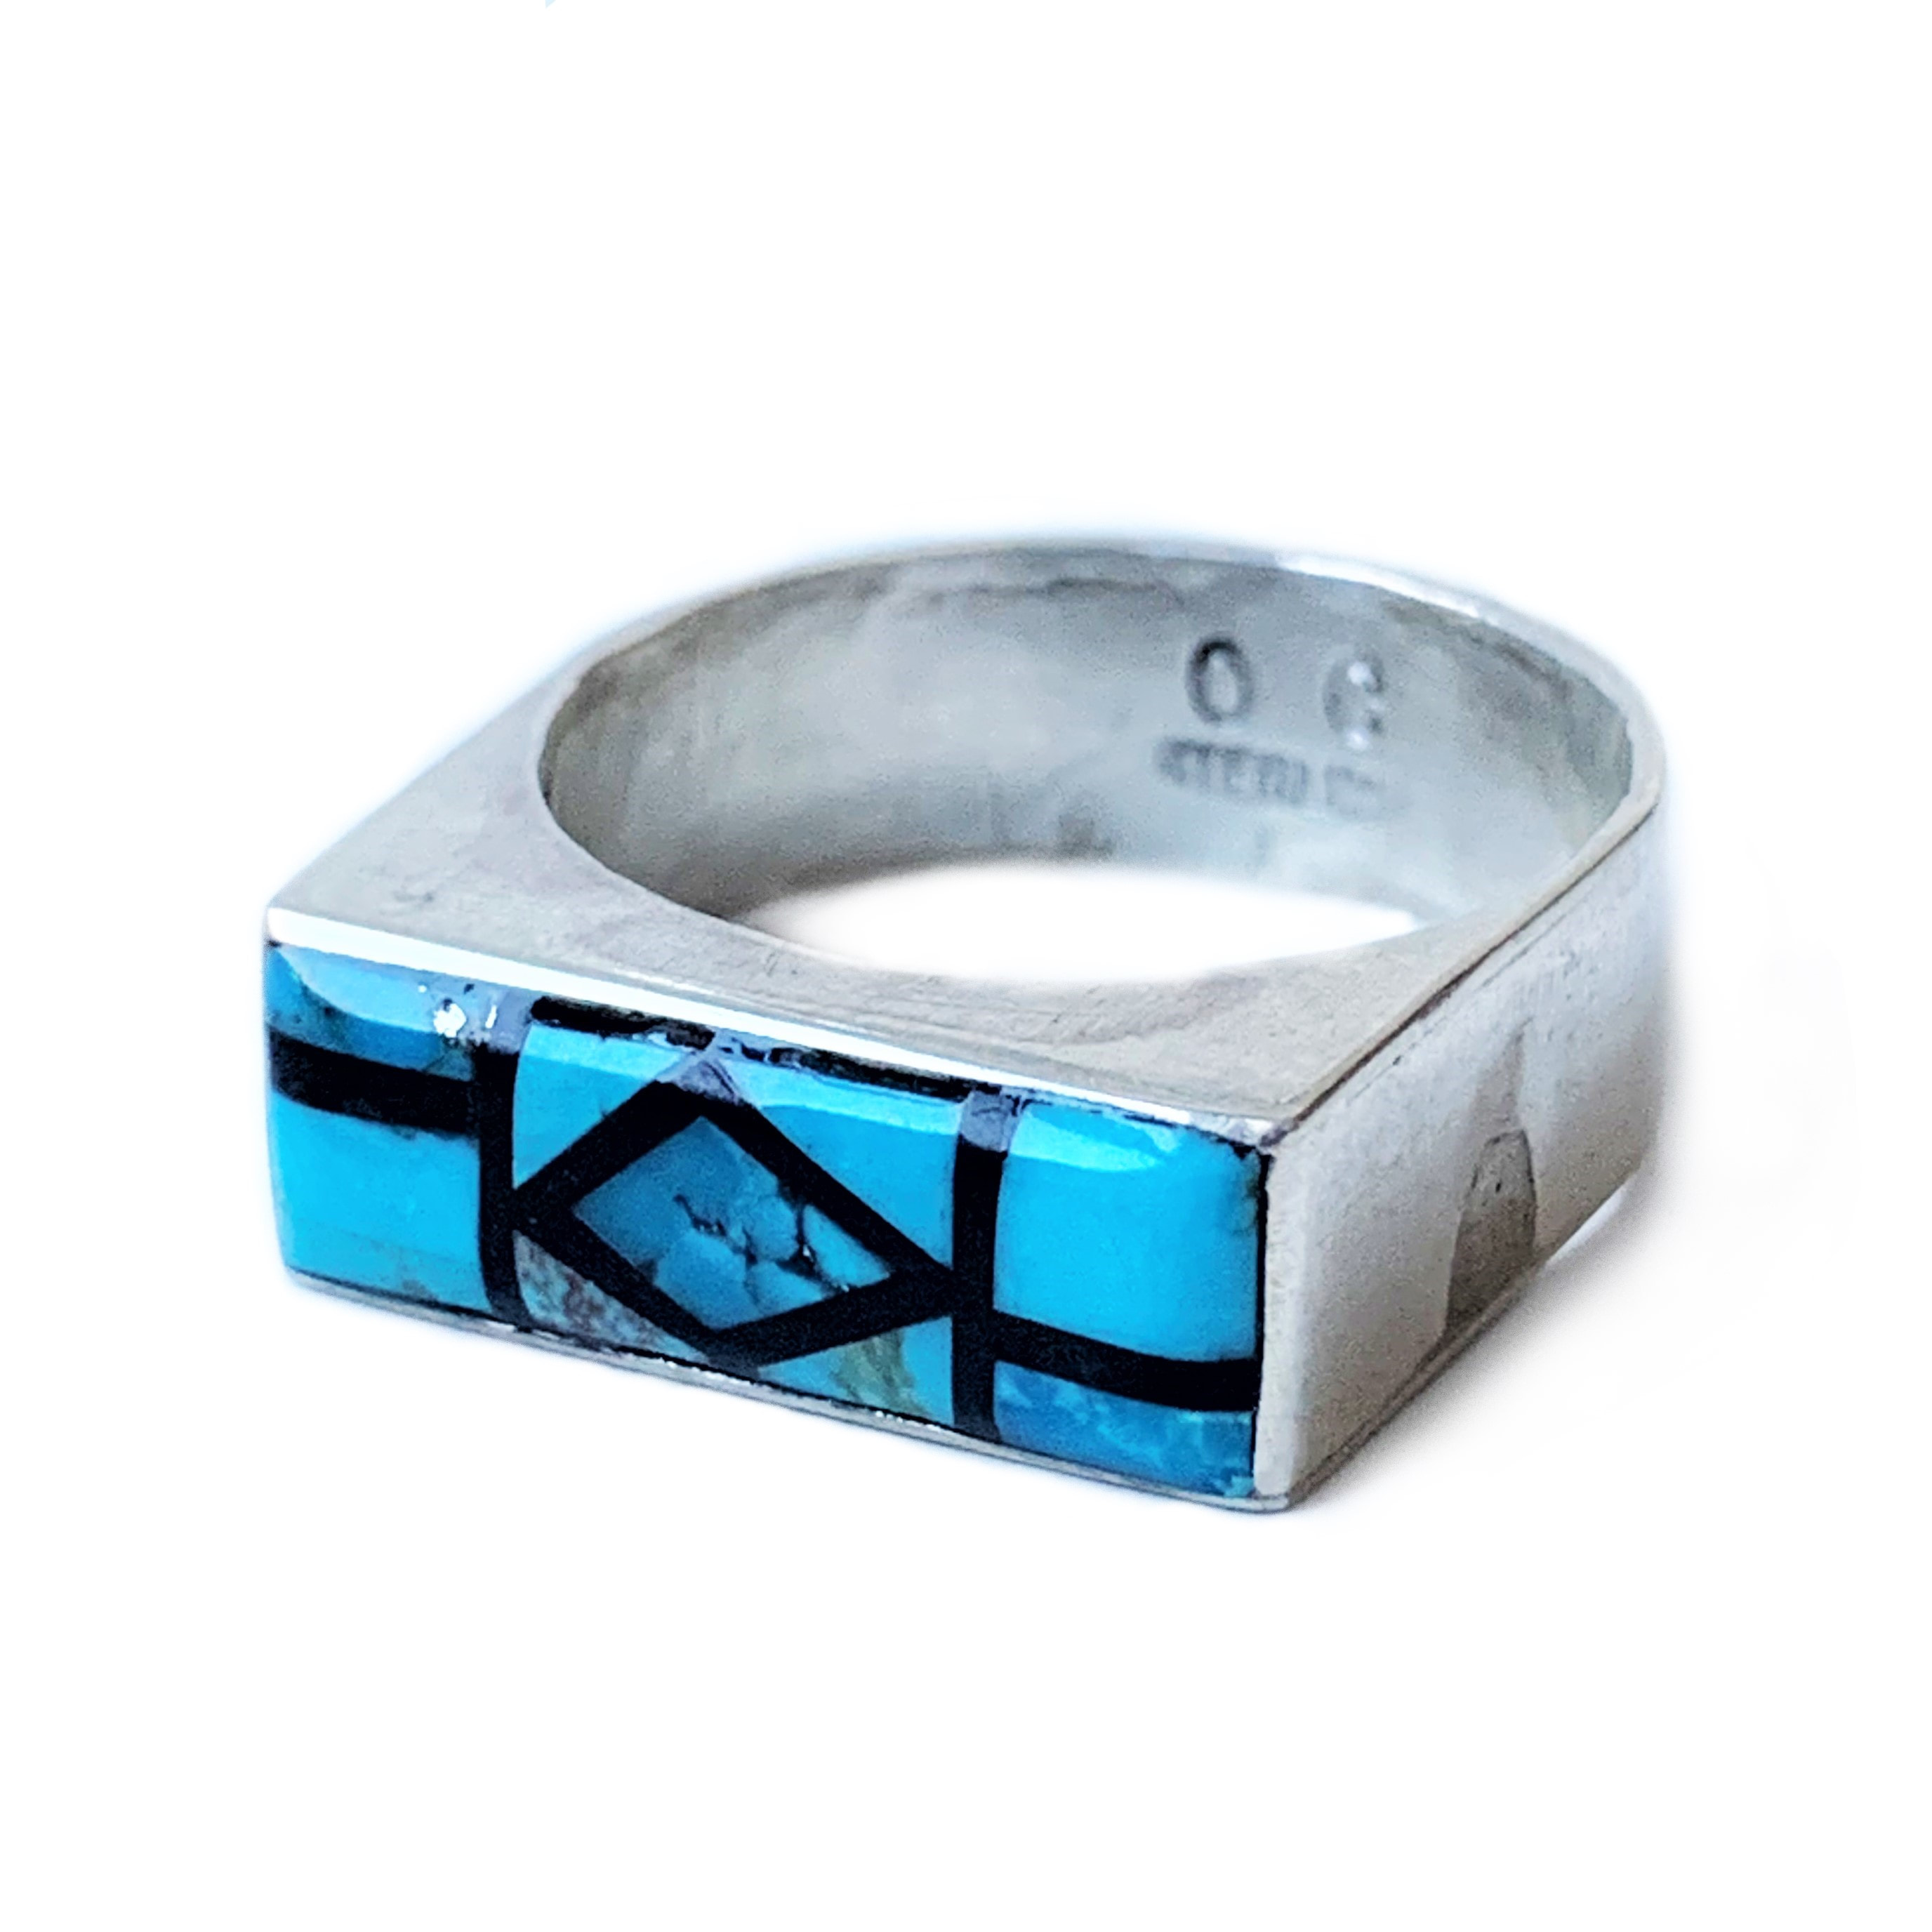 Arizona Sleeping Beauty Turquoise, Boi Ploi Black Spinel and Natural Zircon  Ring in Platinum Overlay Sterling Silver 4.40 Ct. - 7263679 - TJC